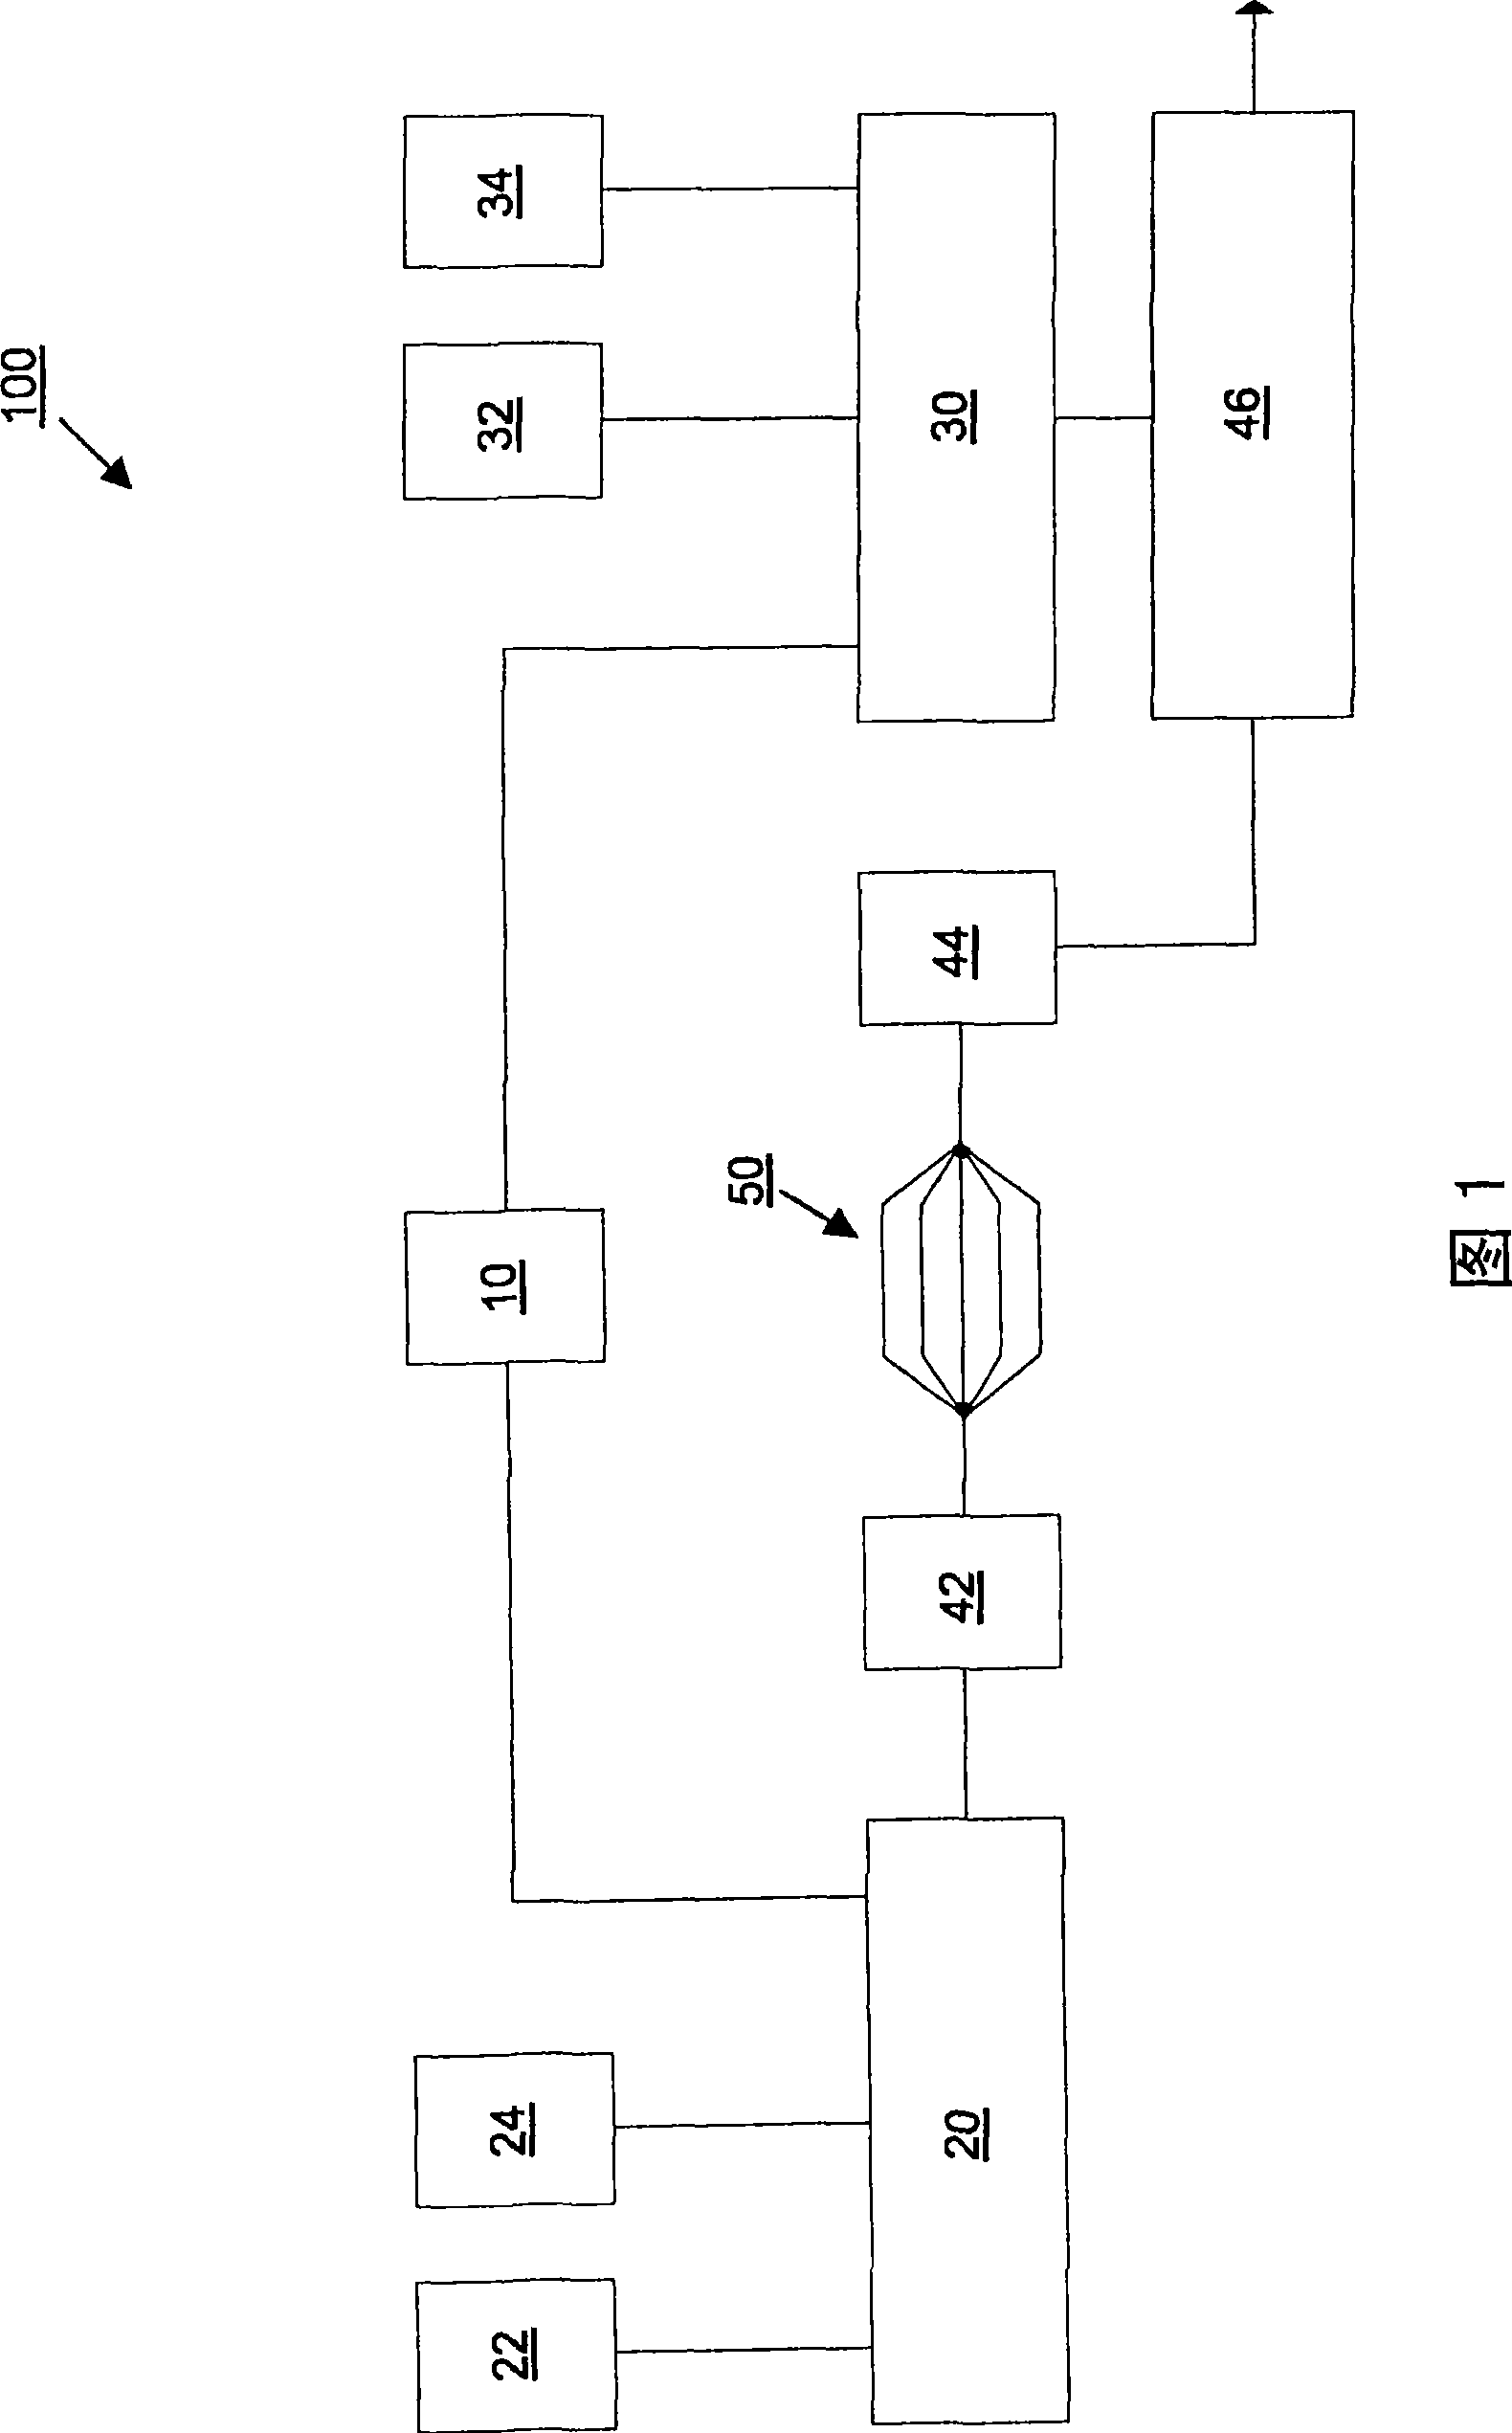 Circuit arrangement, data processing device comprising such circuit arrangement as well as method for identifying an attack on such circuit arrangement